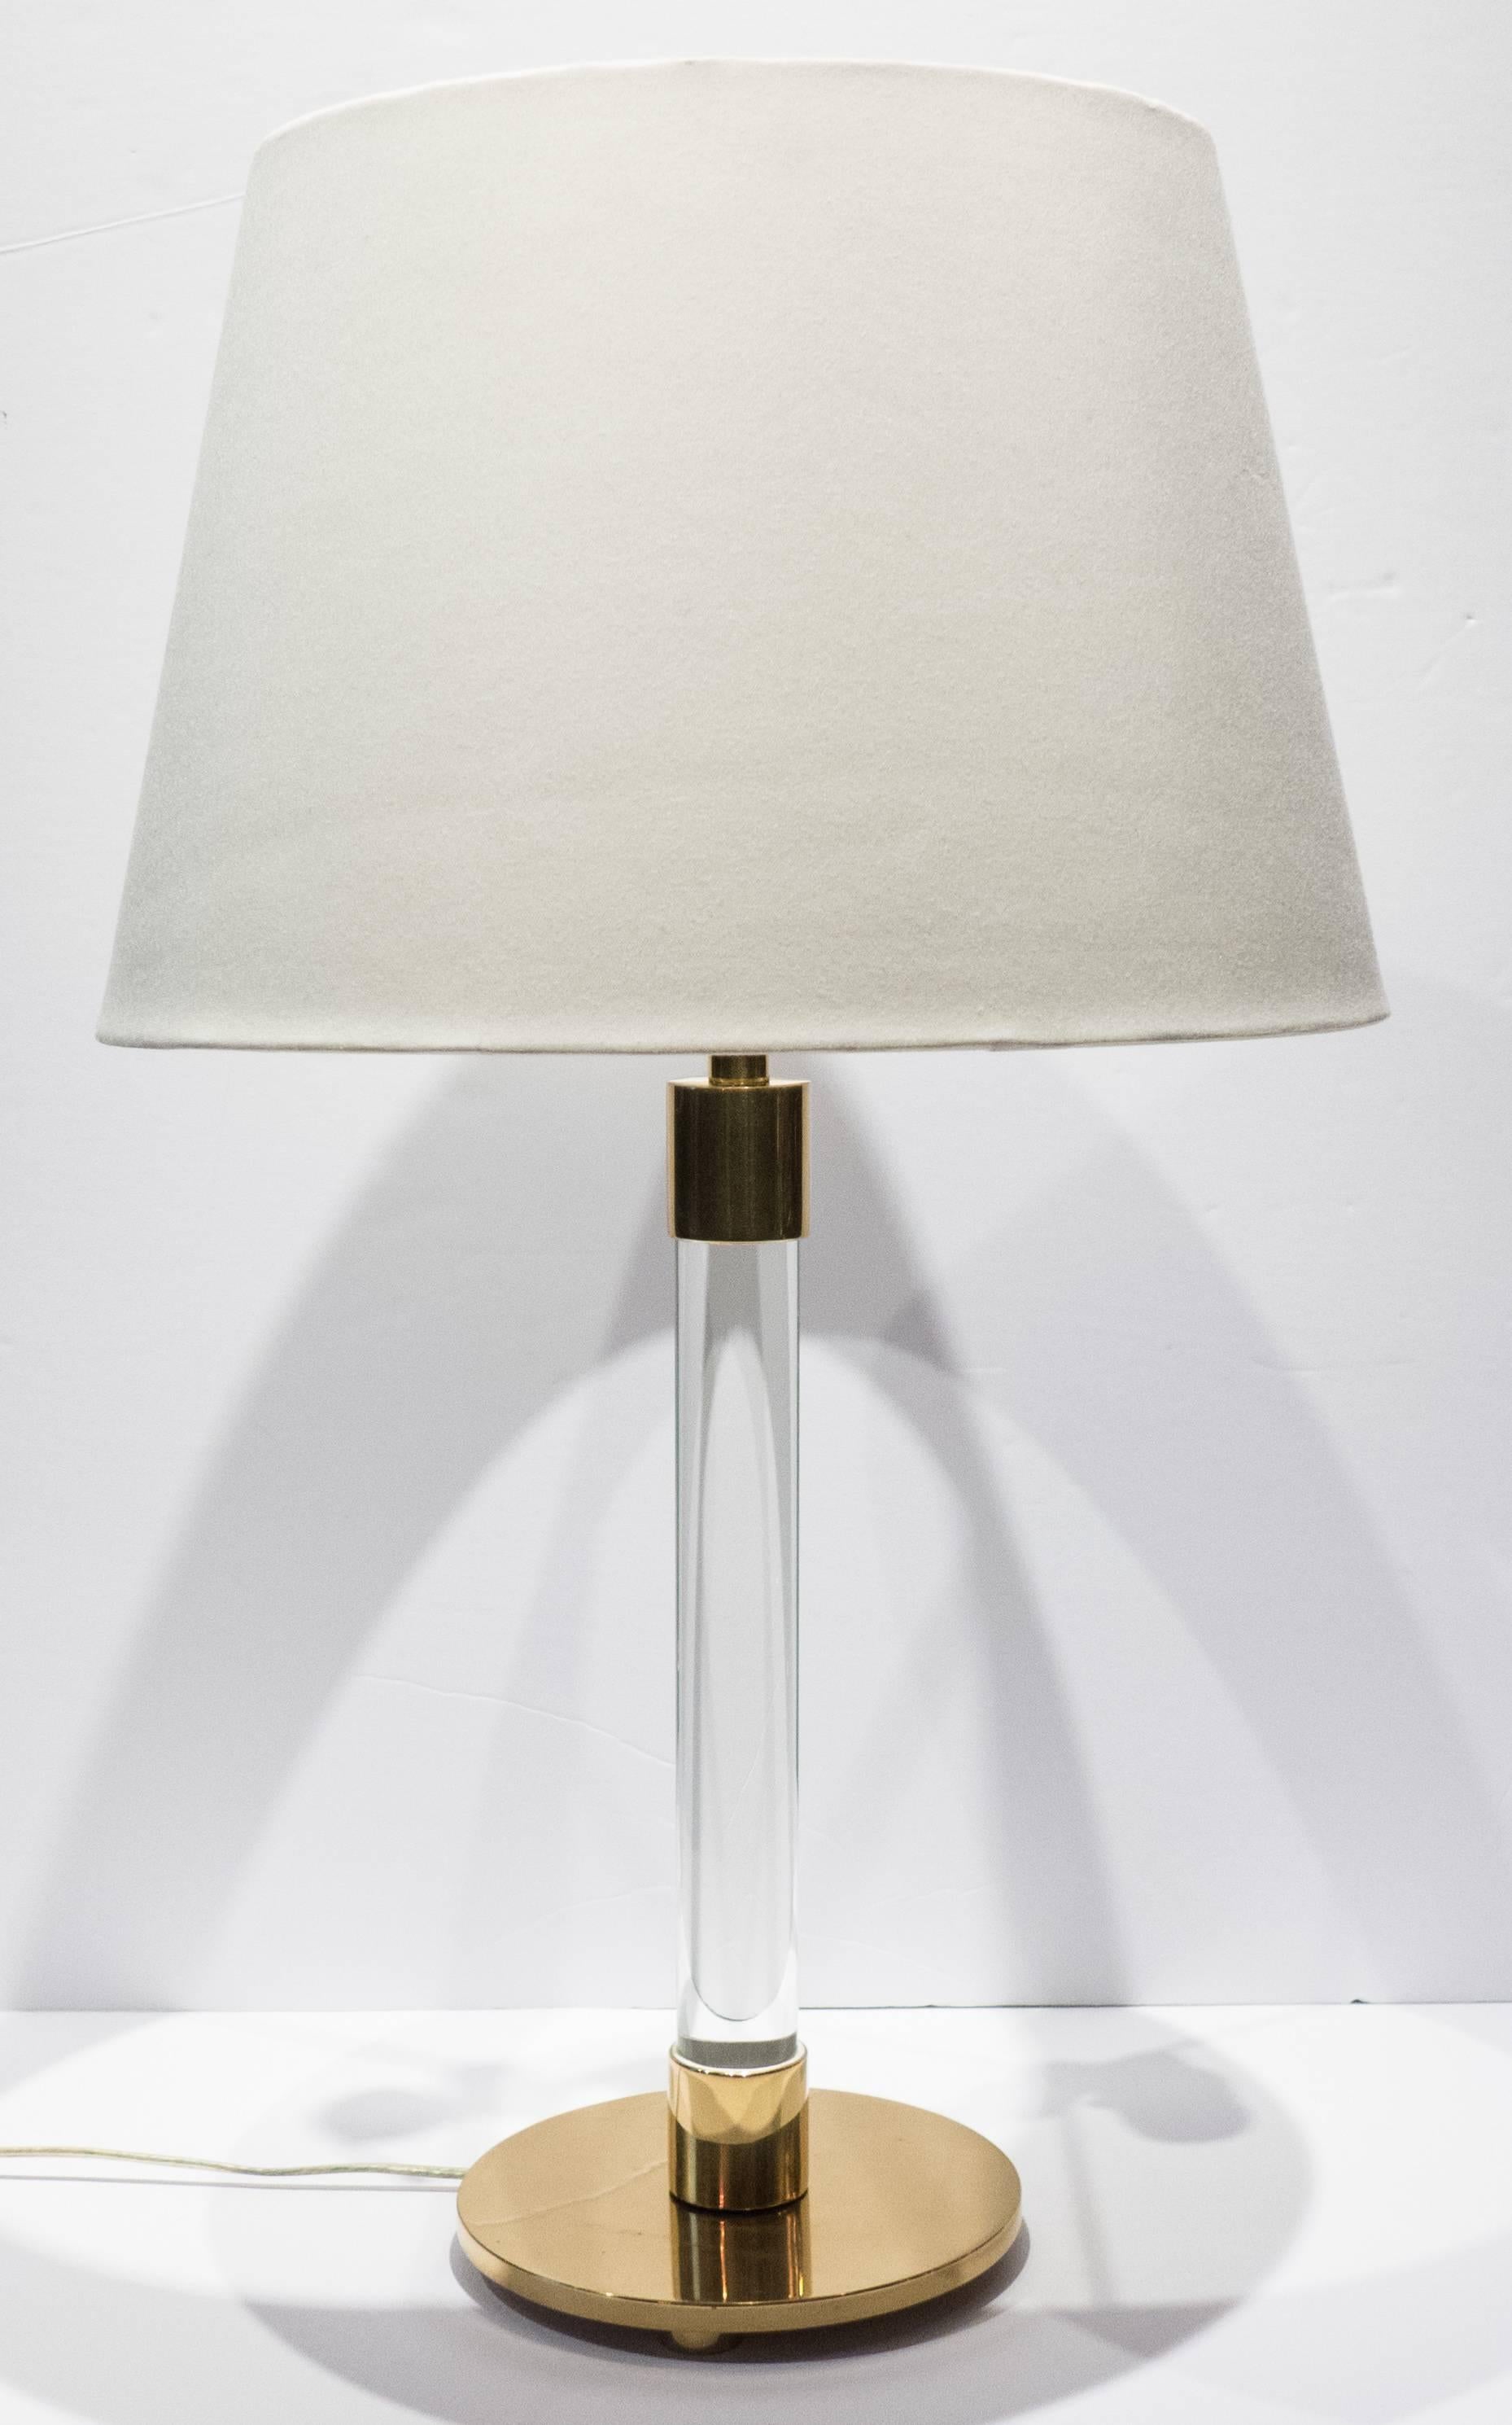 Hansen table lamp with uncommon (footed) round base, along with glass rod and well-machined brass fittings. A Minimalist and elegant design, scarcely seen in a table version. The cord is inset into a channel in the rear of the glass rod, and is